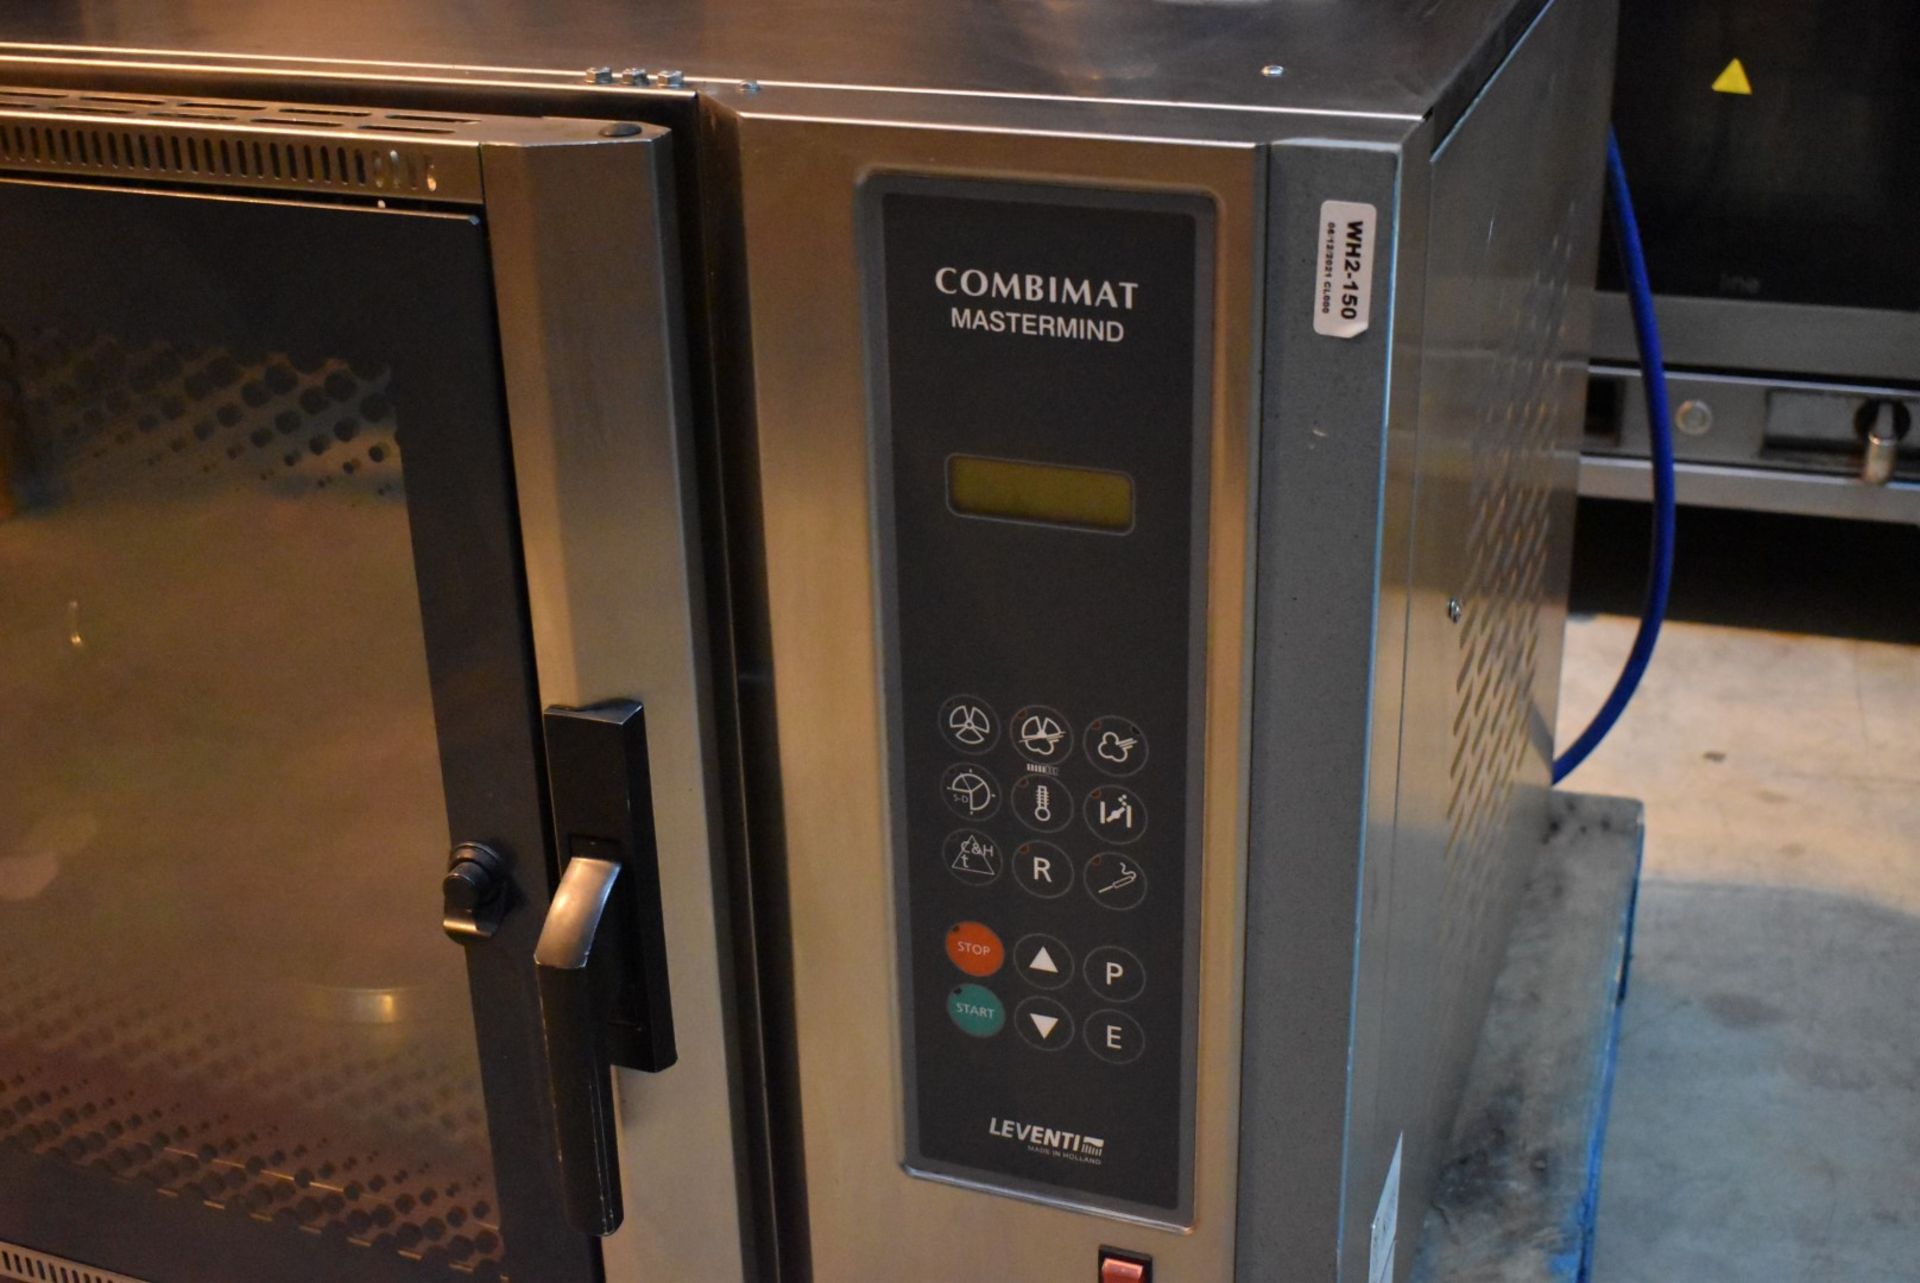 1 x Leventi Combimat mk3.1 Mastermind 6 Grid Combi Steam Oven - 3 Phase - Recently Removed From a - Image 11 of 11